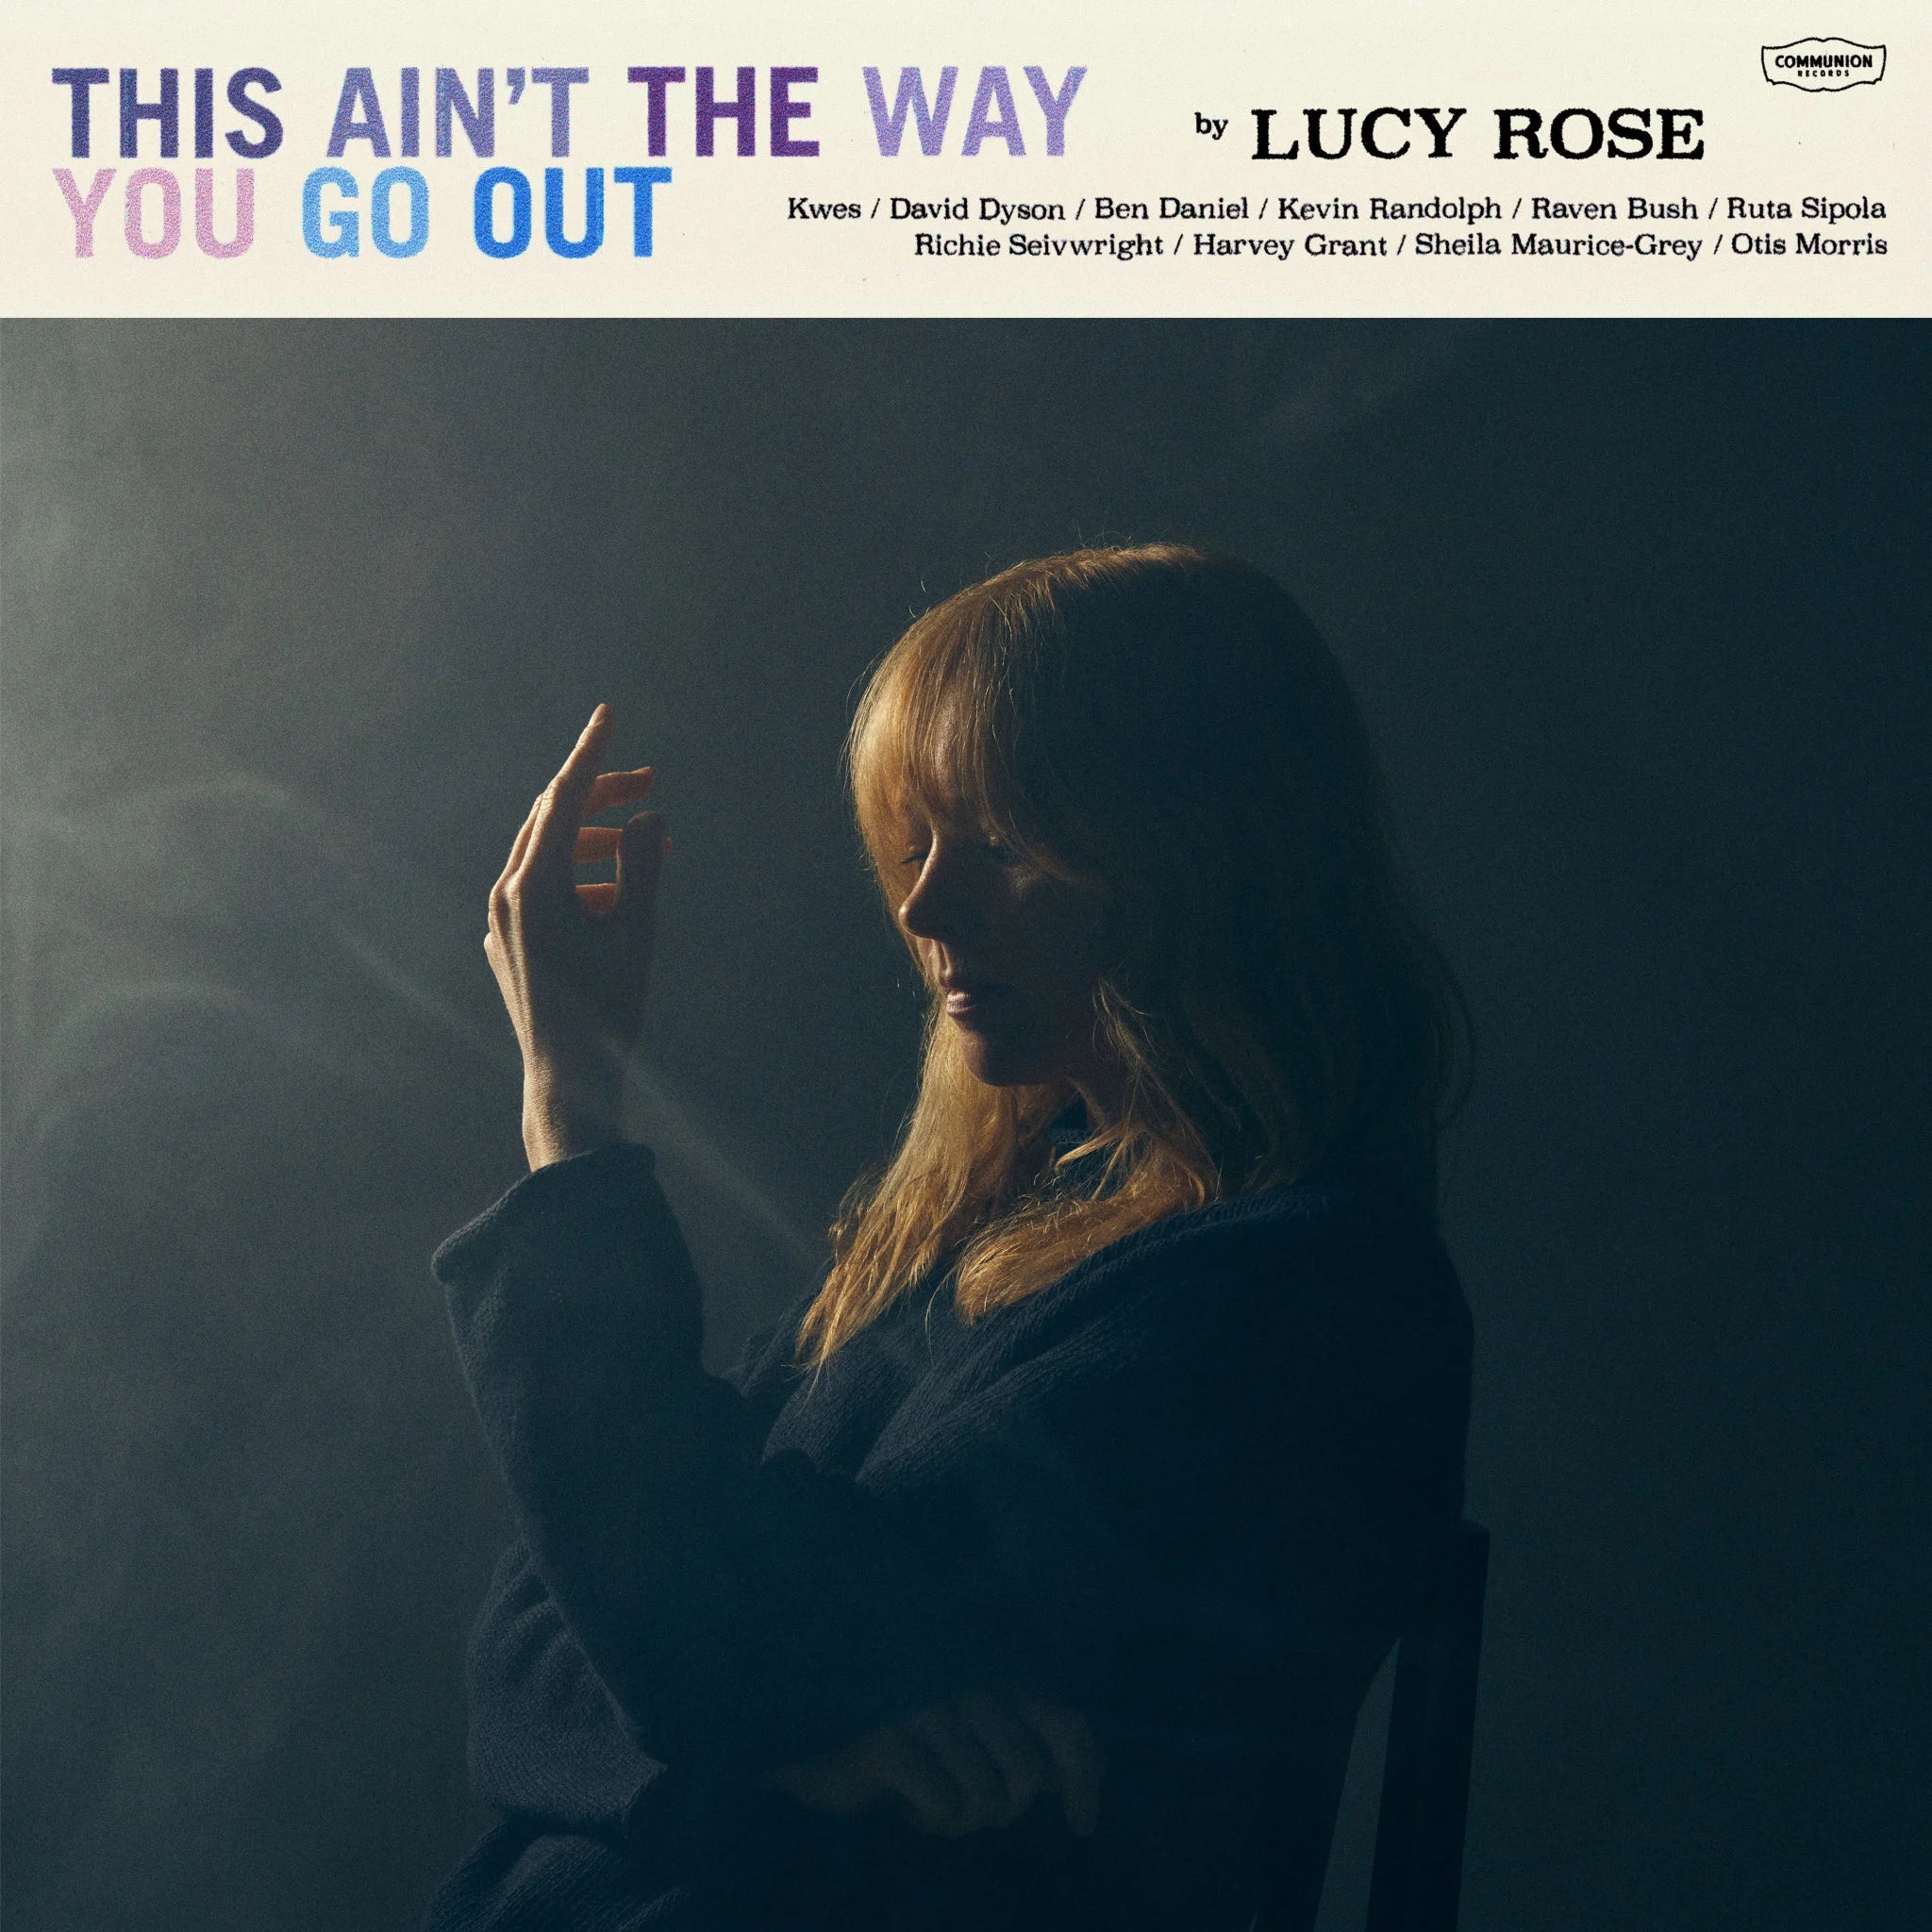 Lucy Rose - This Ain't The Way You Go Out: Vinyl LP